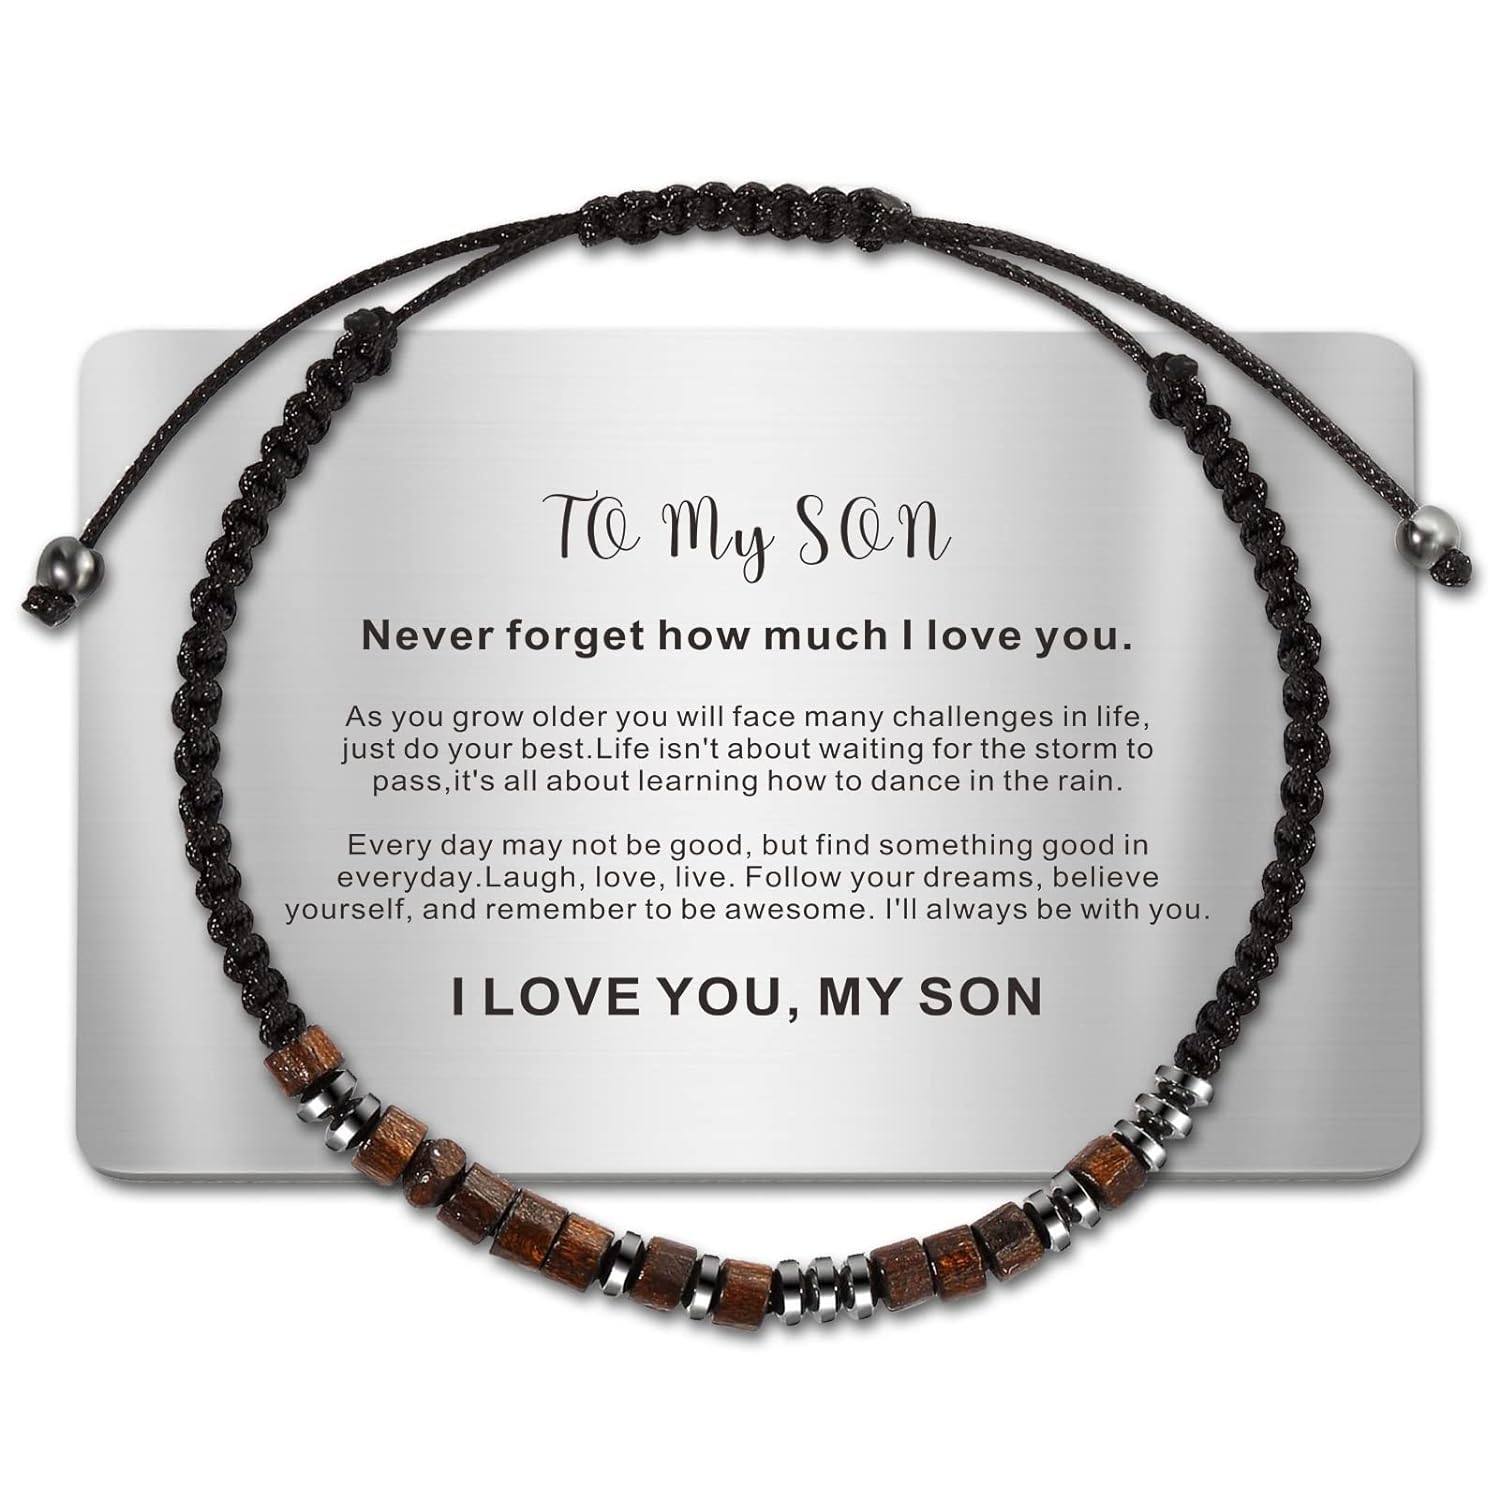 TAGOMEI Valentines Day Gifts for Him Son Men Bracelet, Teen Boys Birthday Gifts Ideas Inspirational Gifts for Men Morse Code Bracelets with Engraved Wallet Card, Adjustable Handmade Beaded Bracelets